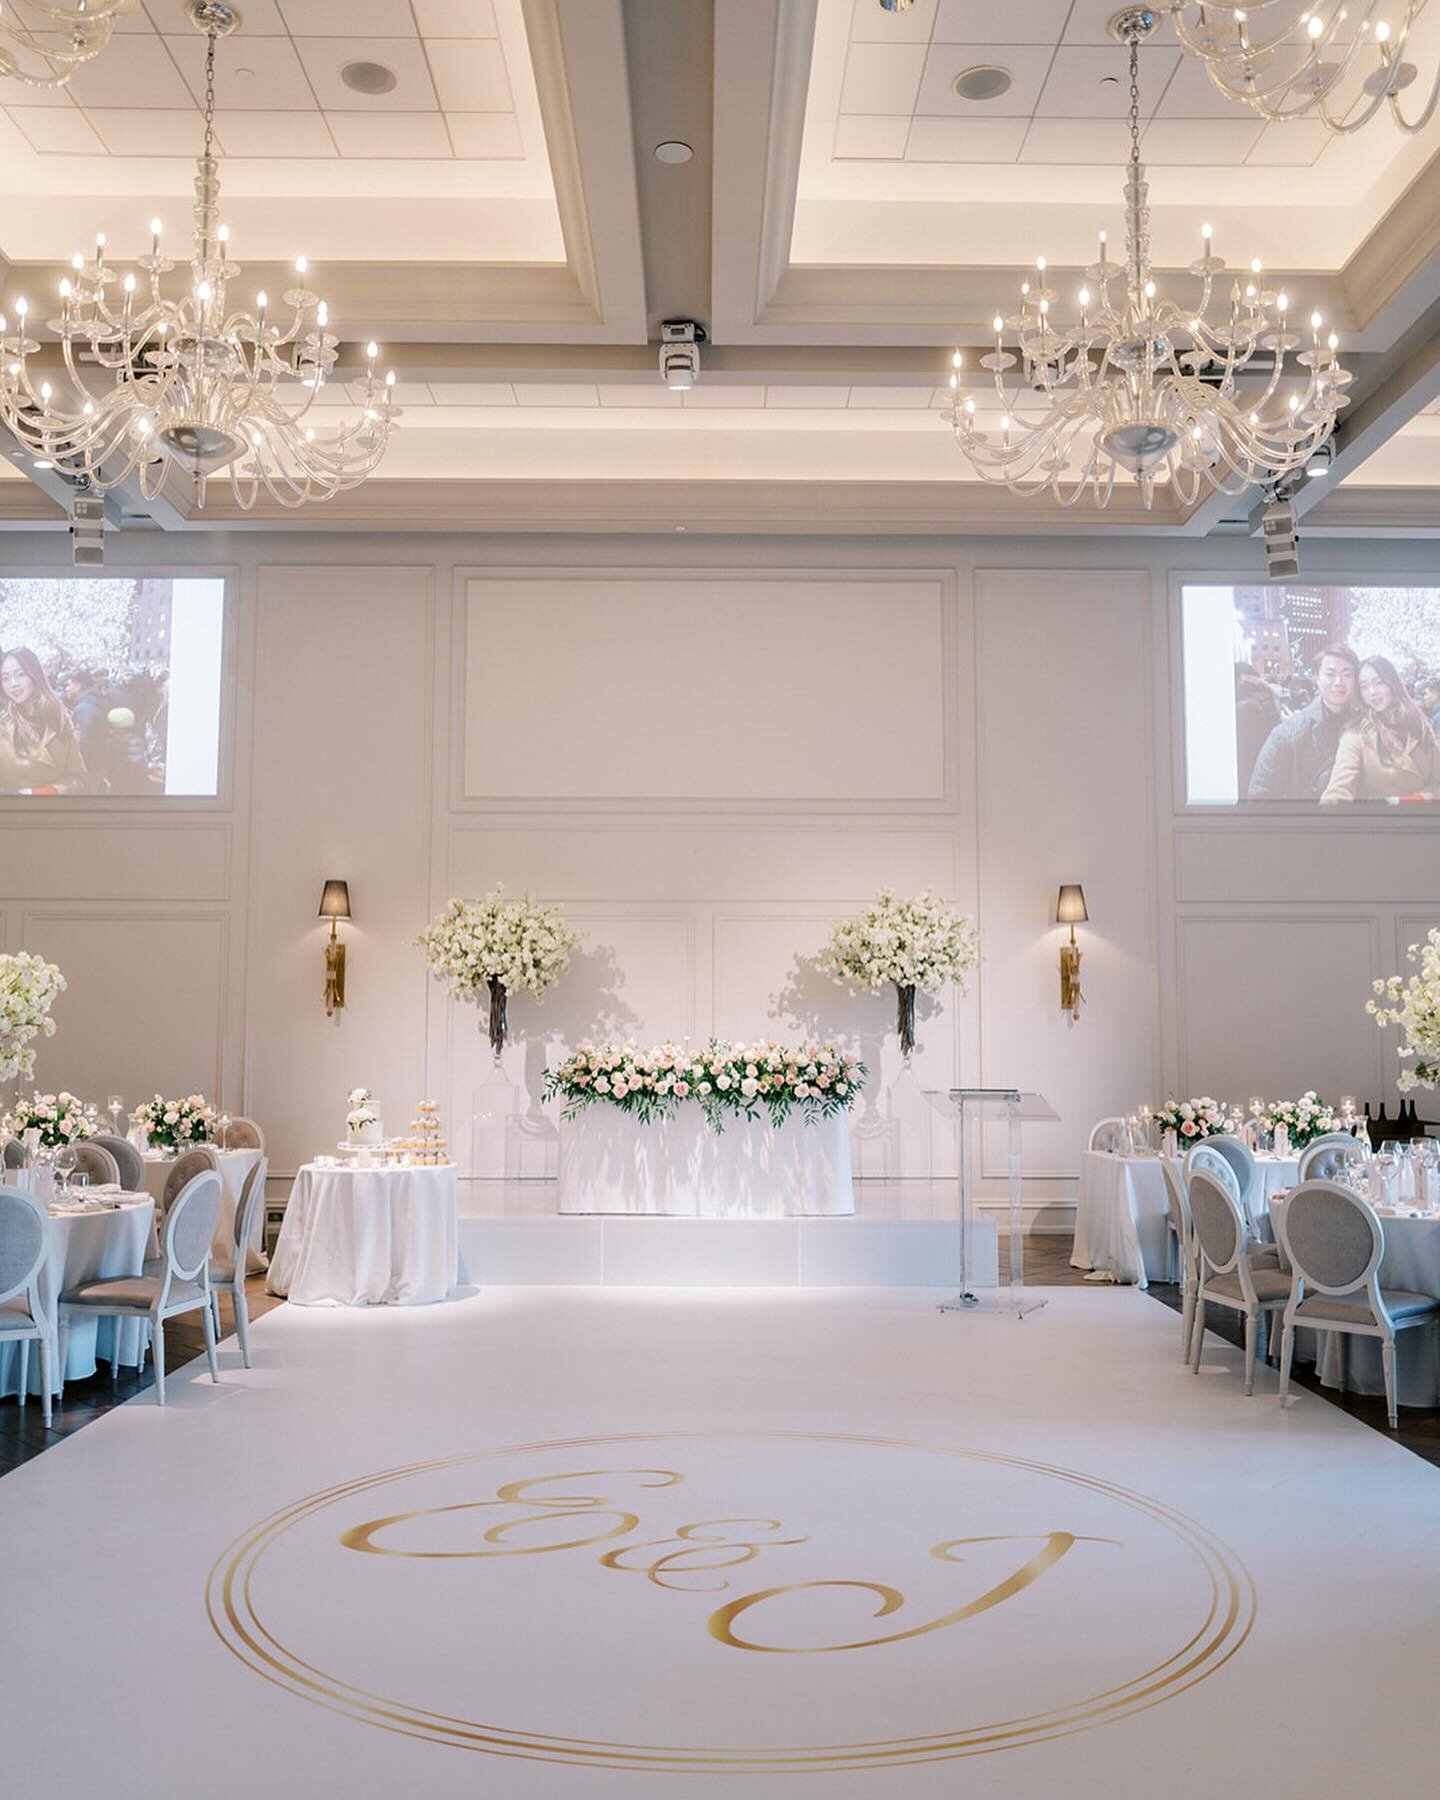 .
.
Capturing timeless love at The Arlington Estate, where high ceilings adorned with chandeliers illuminate the grandeur of E&amp;J&rsquo;s special day. Amidst the airy ambiance and abundant natural light, blush &amp; cream florals set the stage for